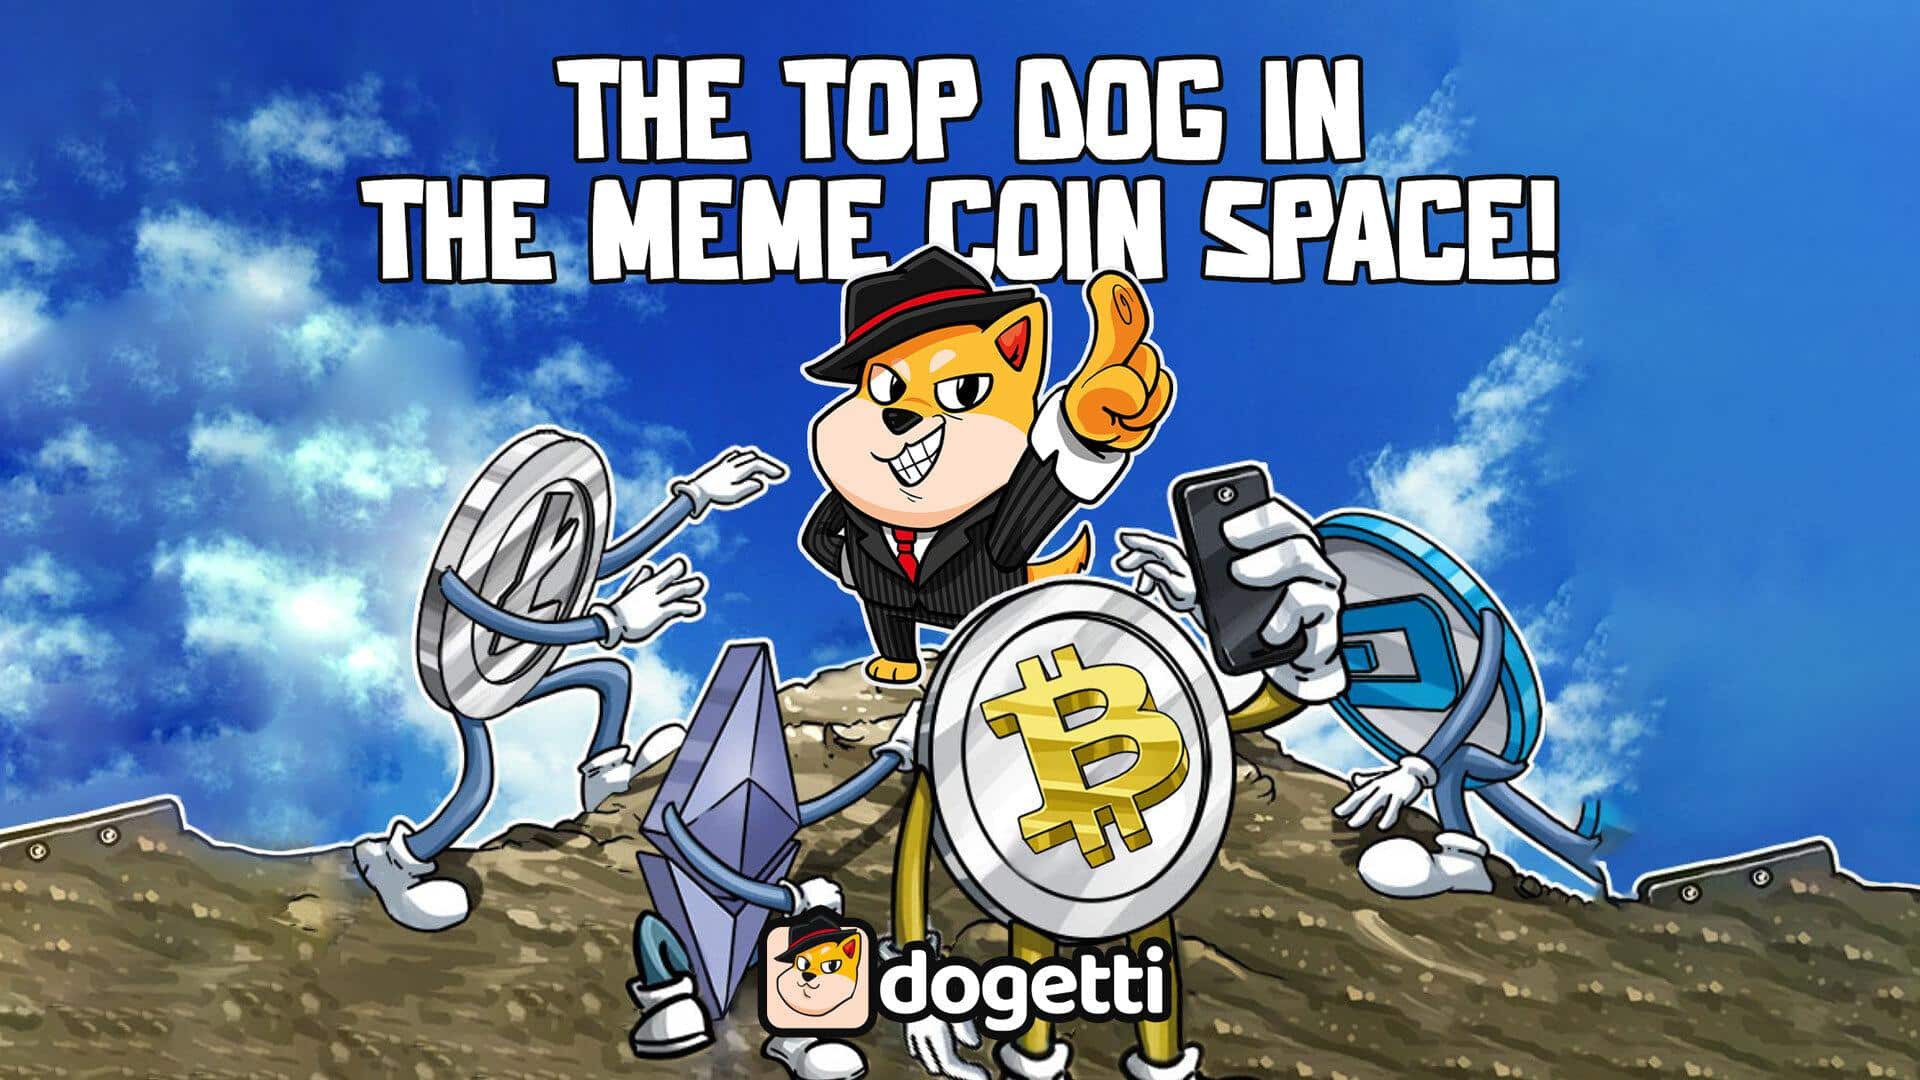 the-dog-eat-dog-crypto-pre-sale-is-here-dont-miss-the-meme-coin-showdown-between-dogetti-metacade-and-dogecoin